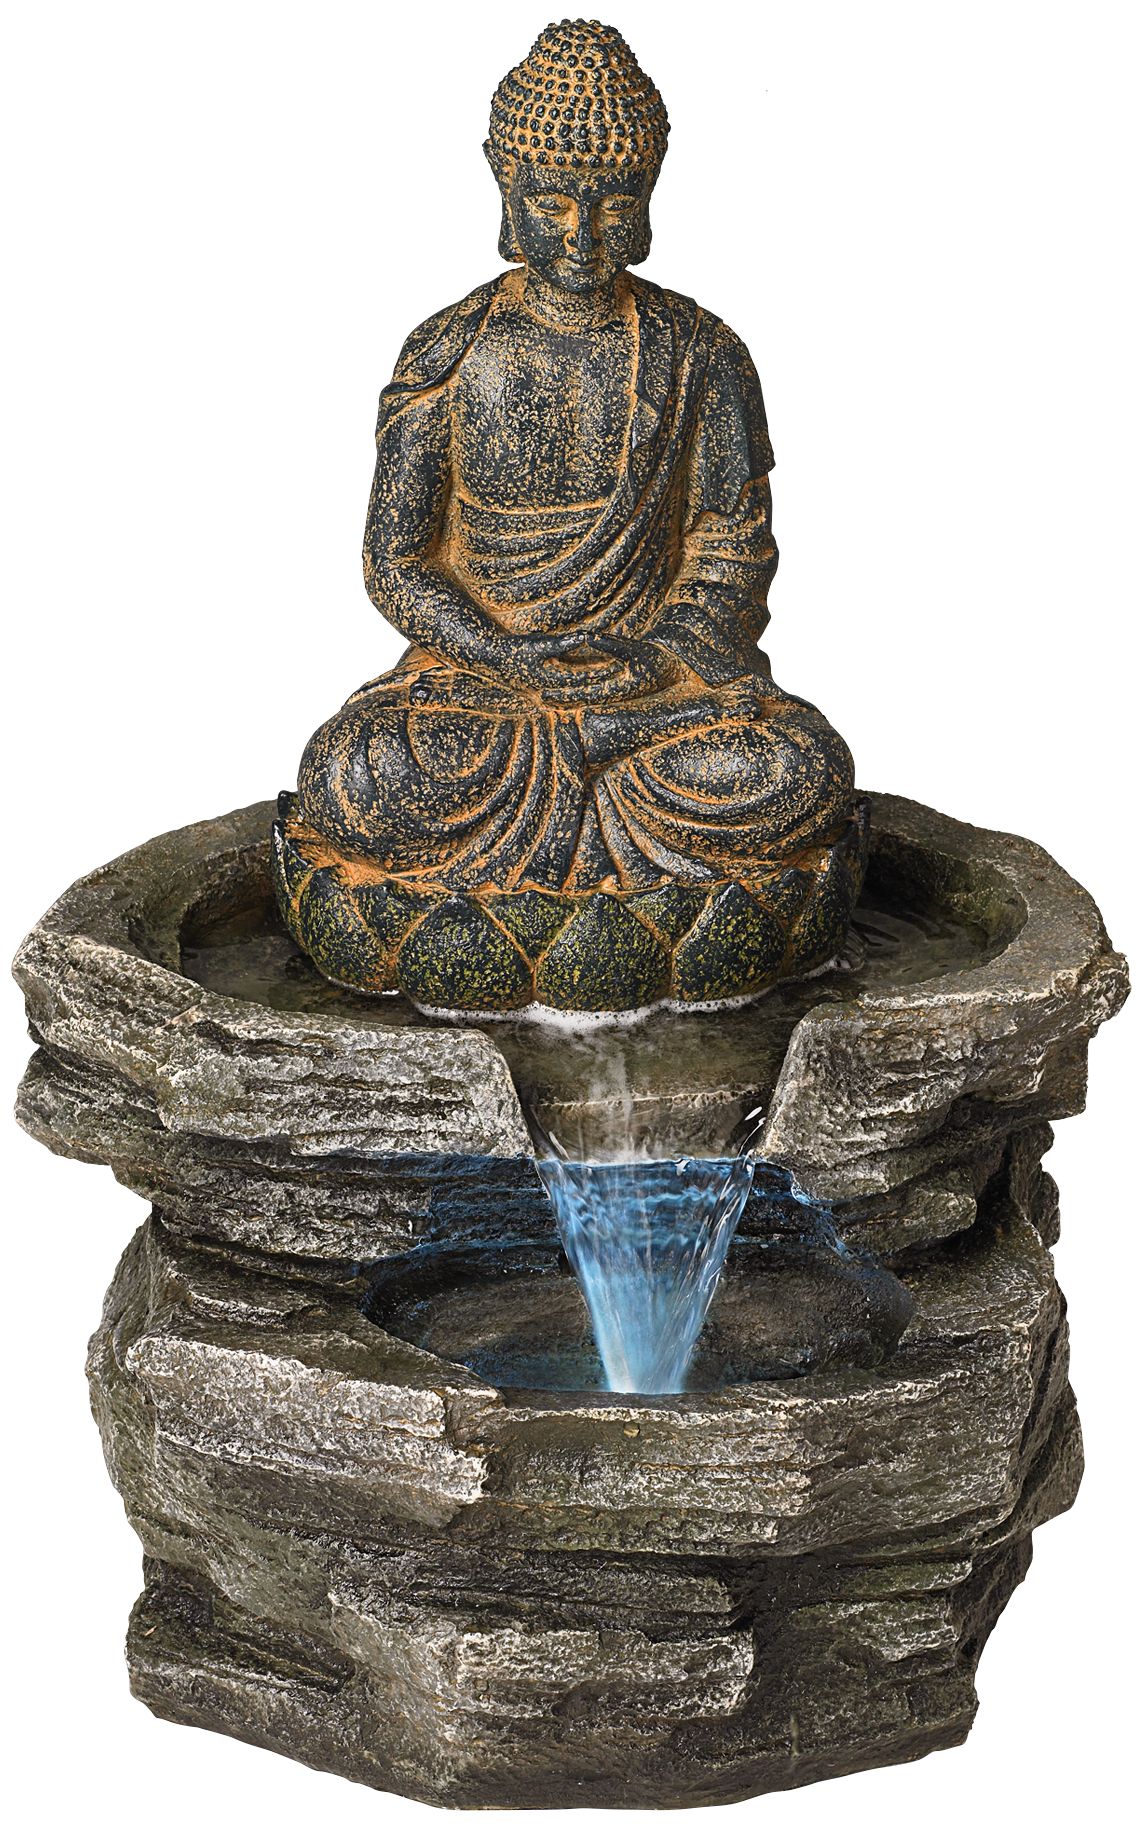 John Timberland Rustic Zen Buddha Outdoor Floor Water Fountain with Light LED 21" High Sitting for Yard Garden Patio Deck Home - image 3 of 8